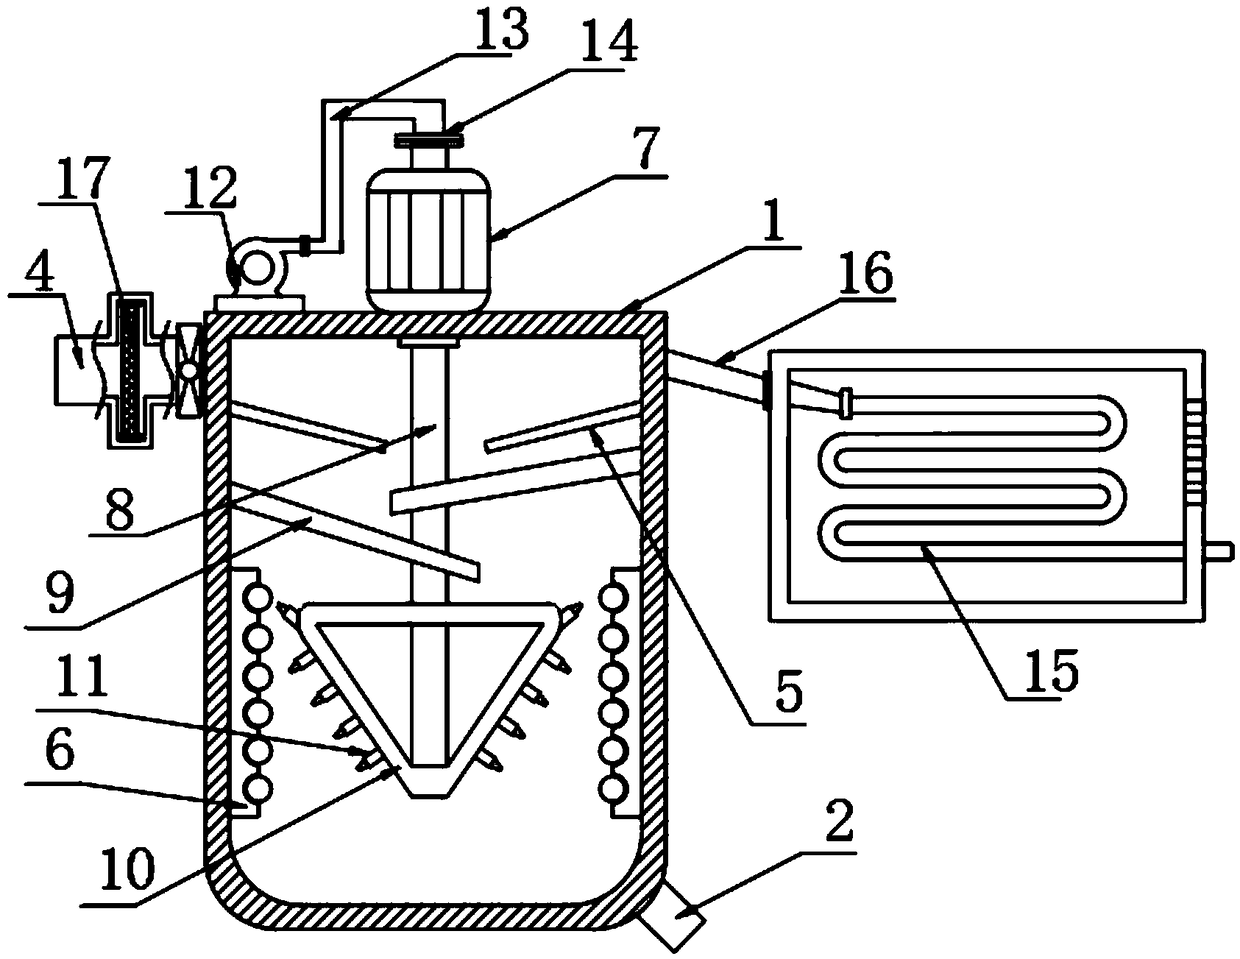 Seawater desalination device and method for ships